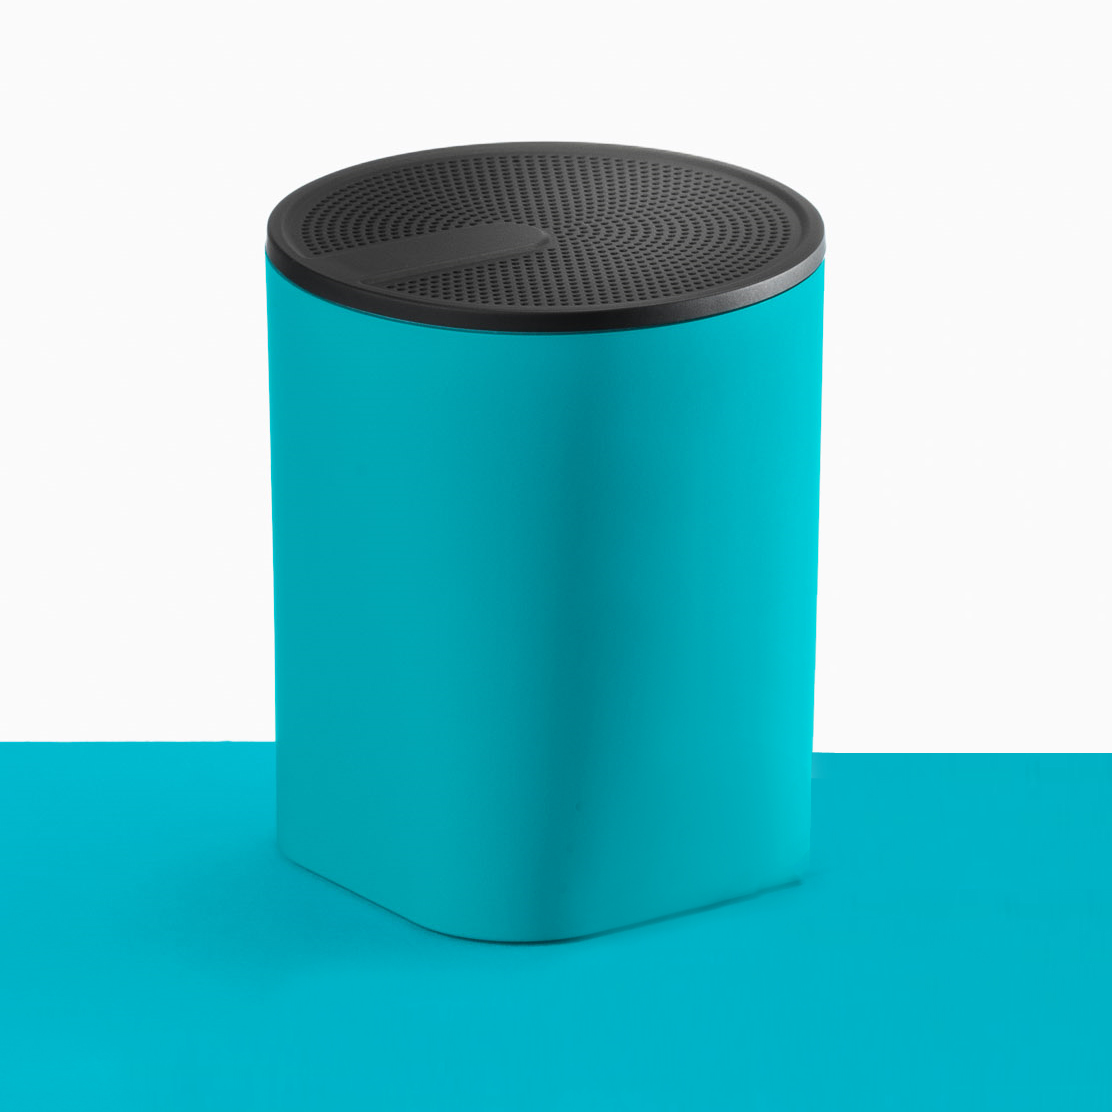 Turquoise Colour Sound Compact Speaker